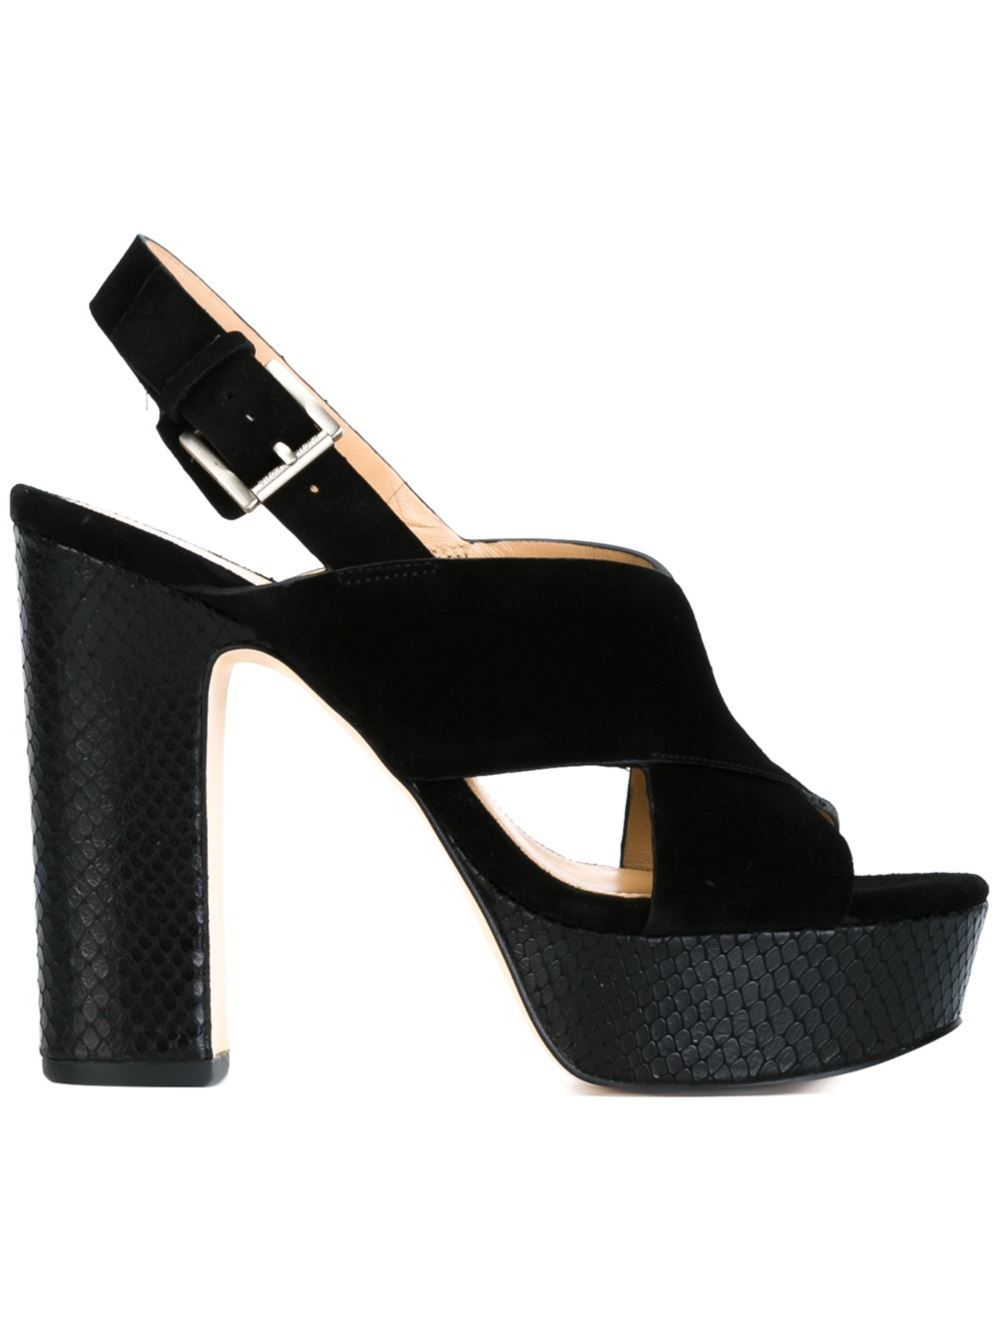 MICHAEL Michael Kors Mariana Suede and Leather Platform Sandals in Black |  Lyst